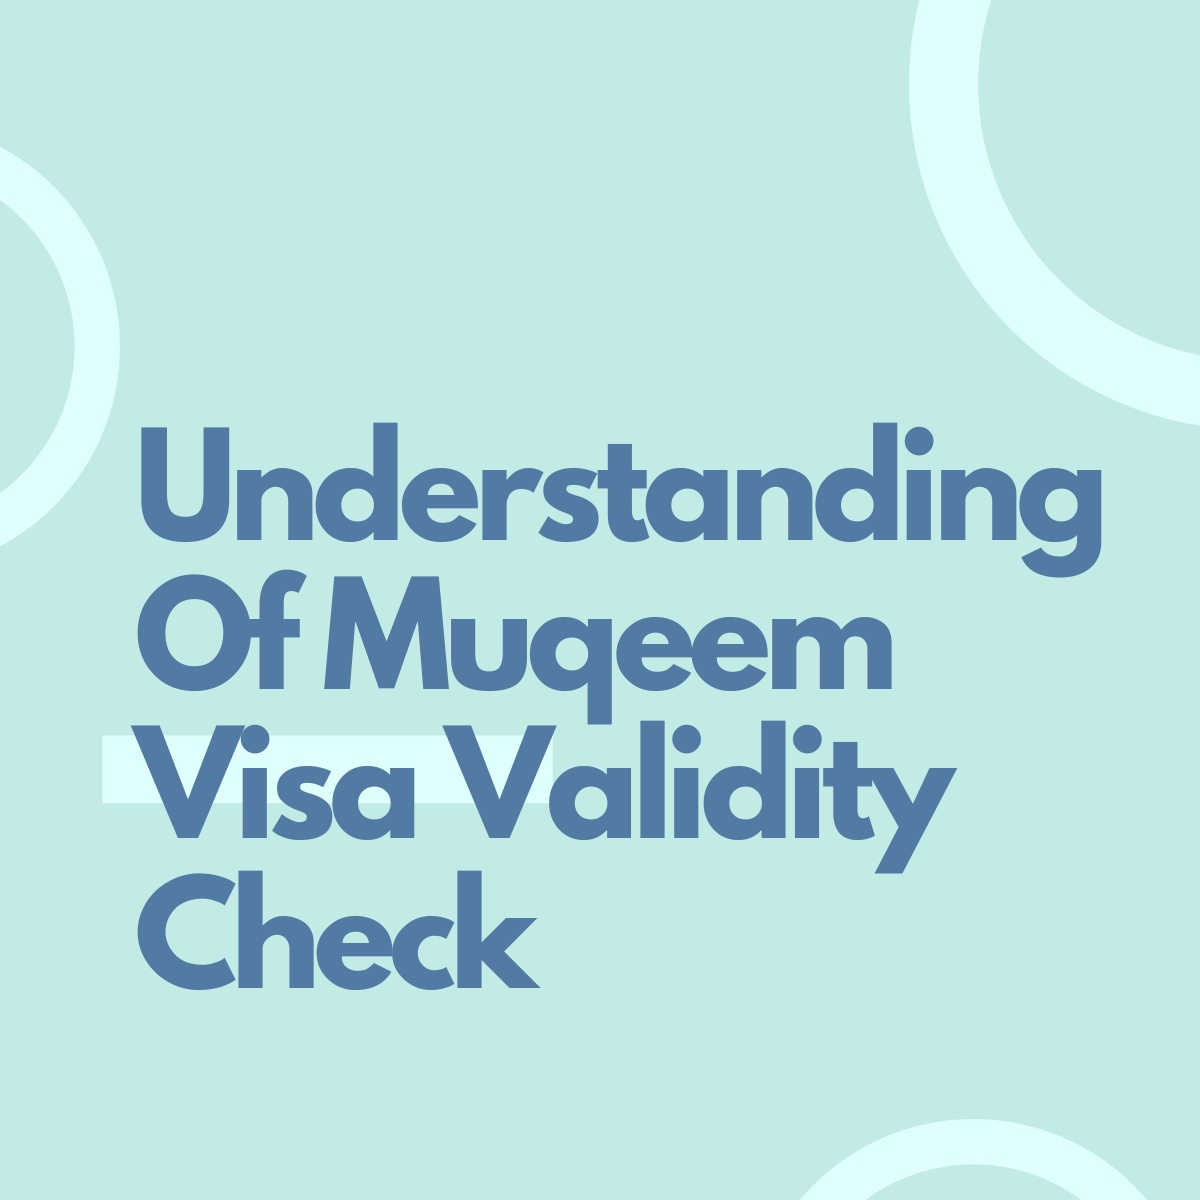 Information You Need to Know About Muqeem Visa Validity Check